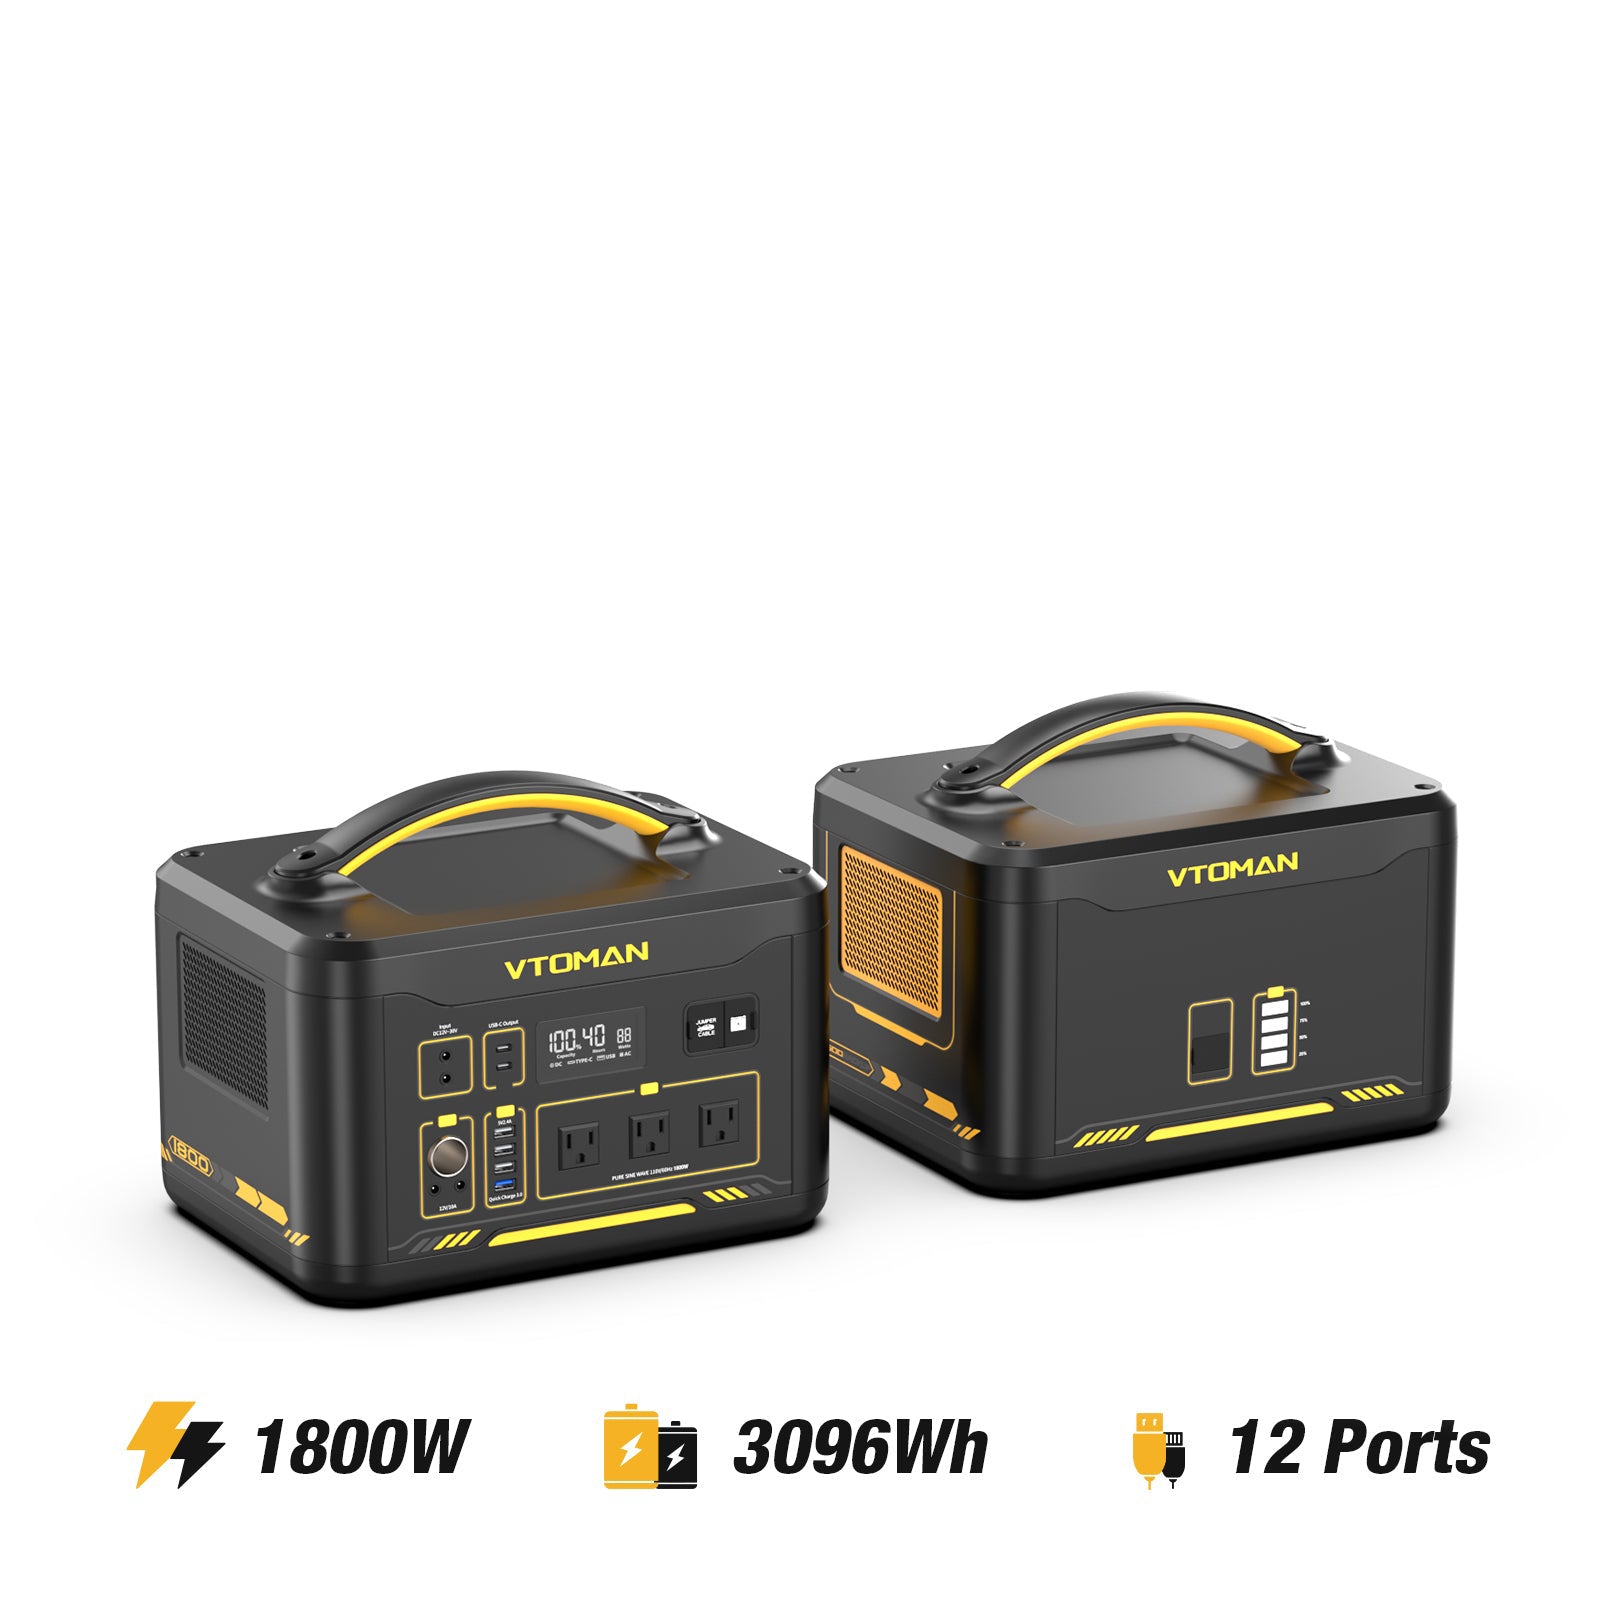 JUMP1800+1548wh extra battery